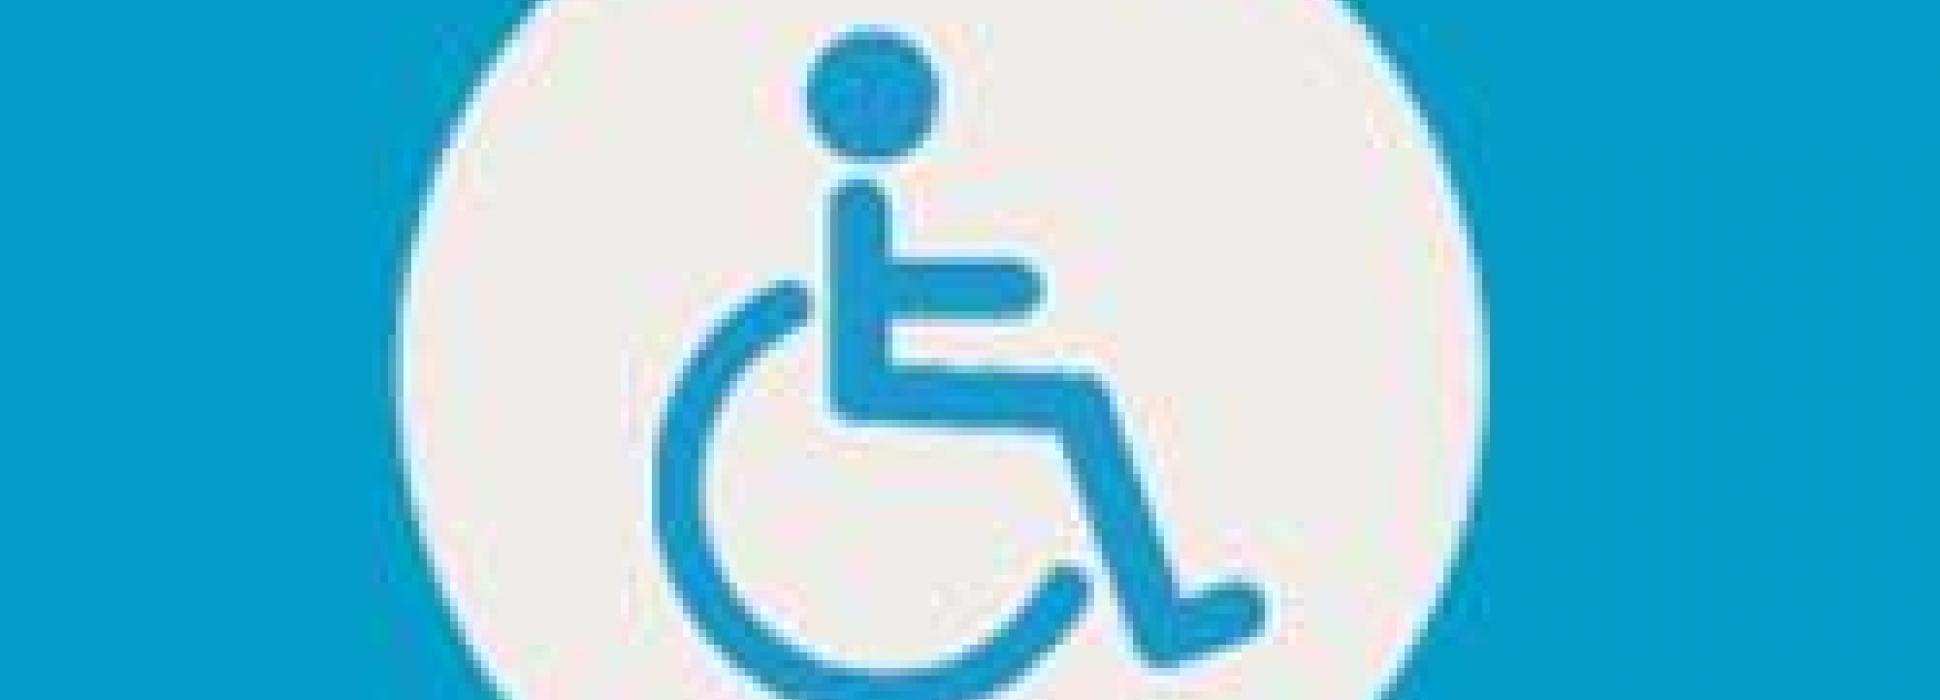 New online services for people with limited mobility